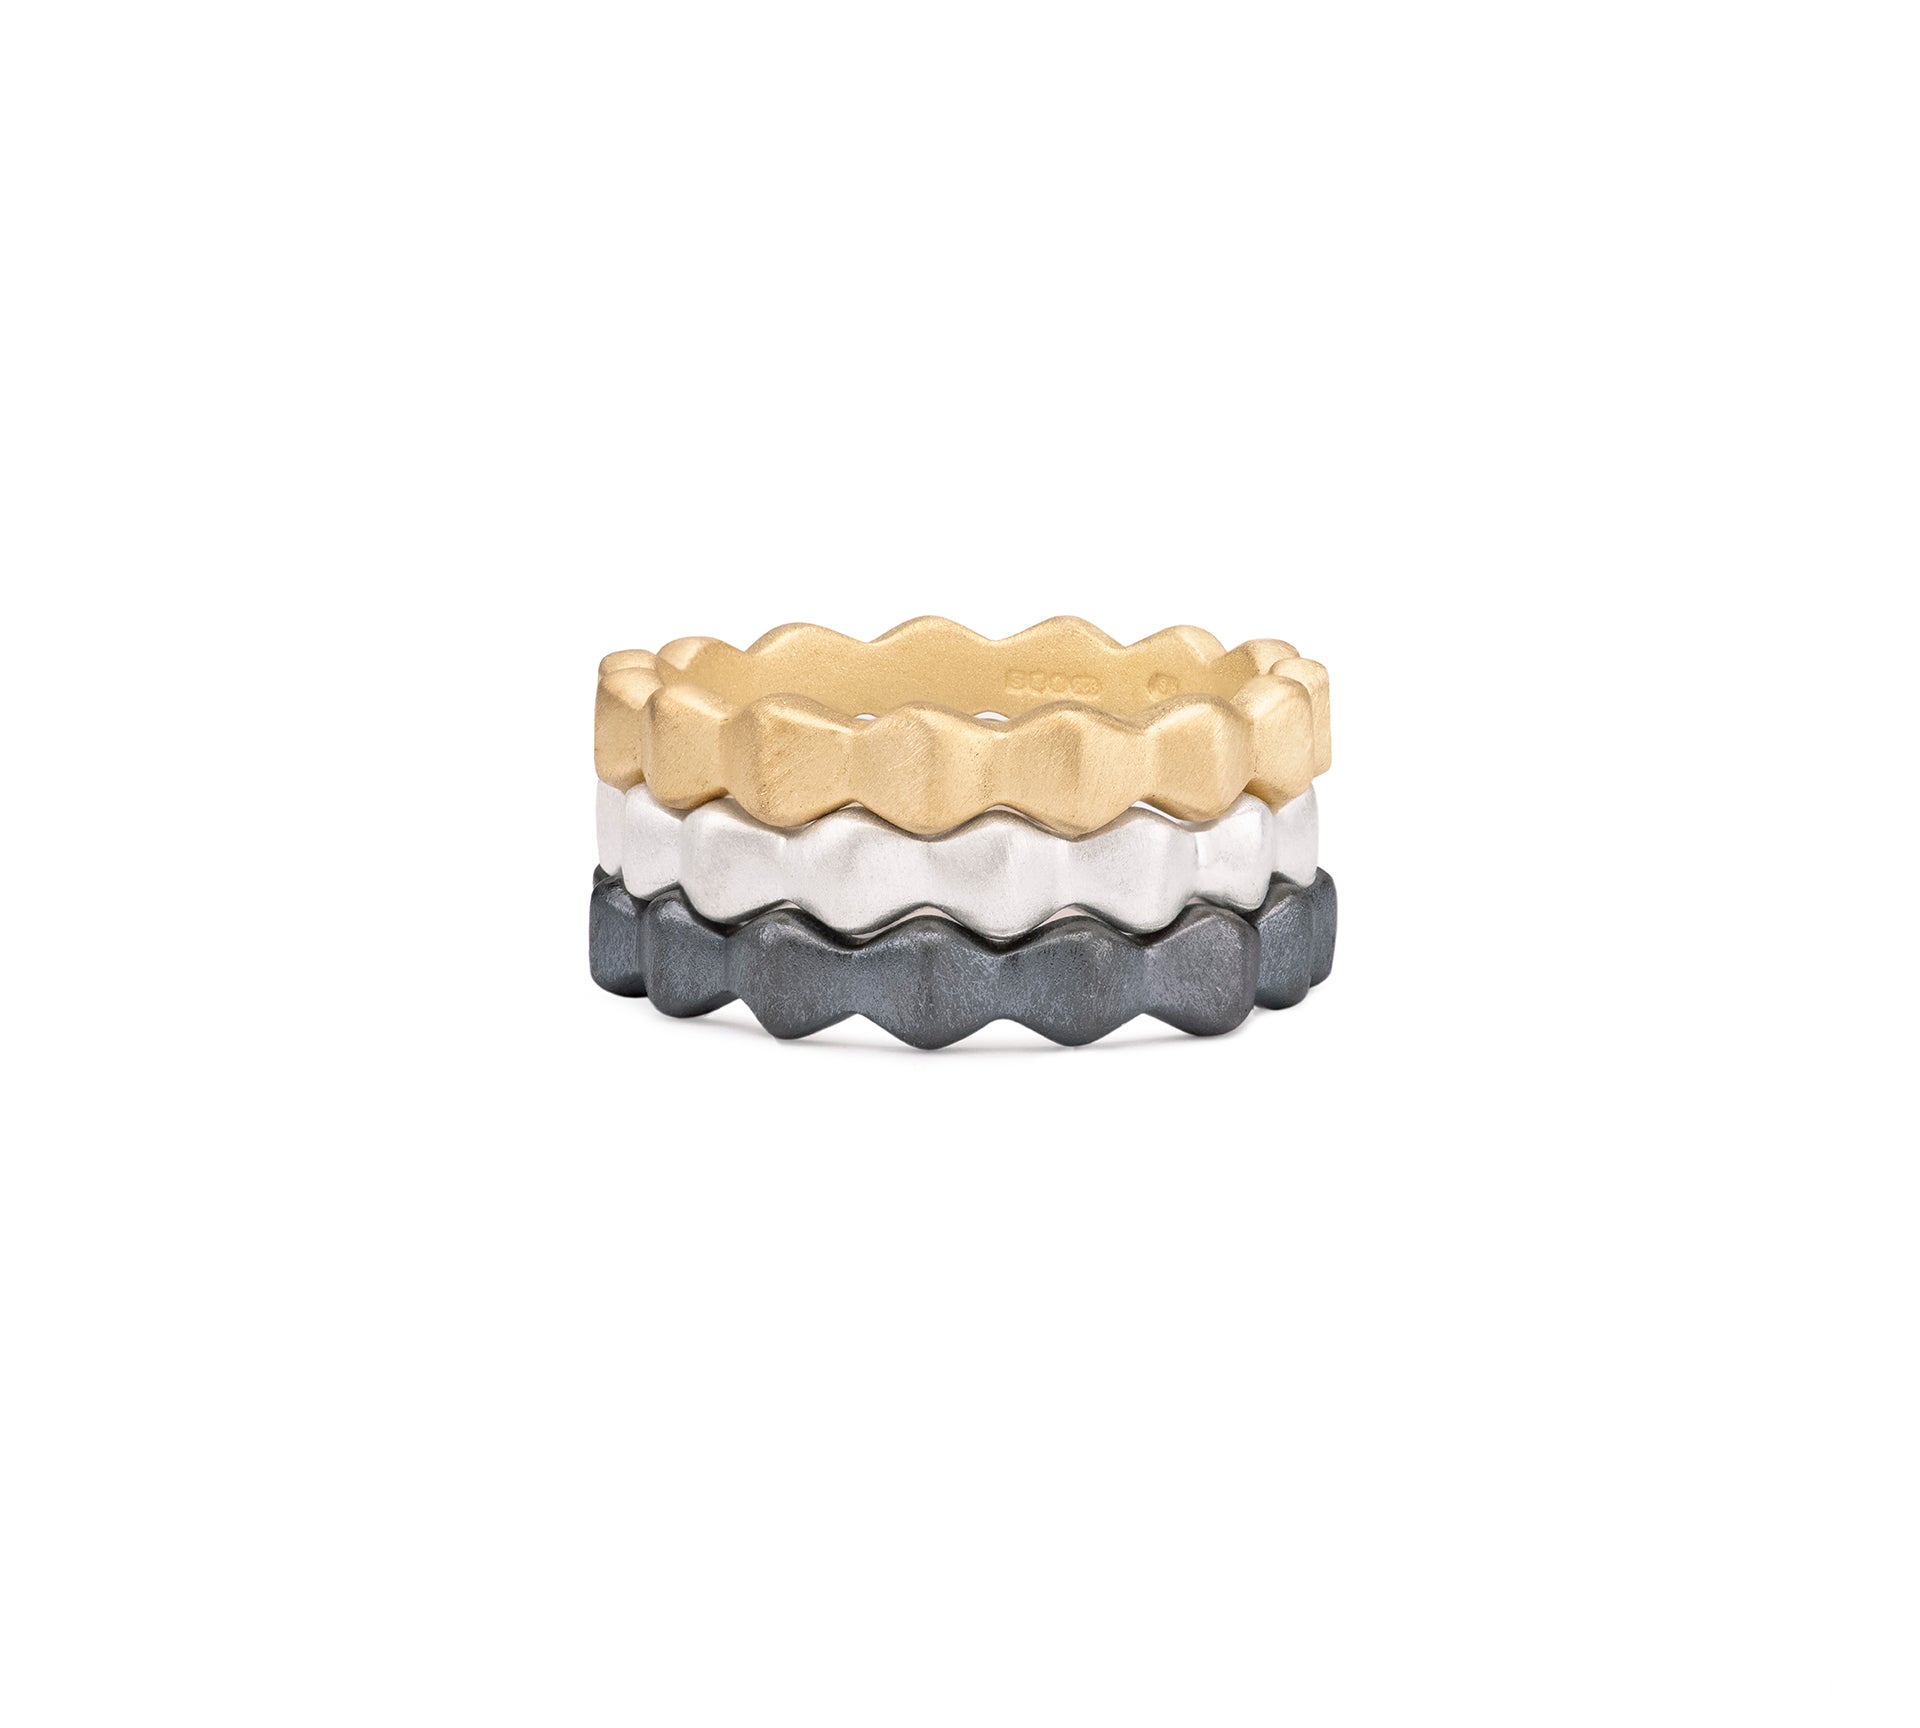 Pyra Stacking Rings in black, silver and gold by Romany Starrs